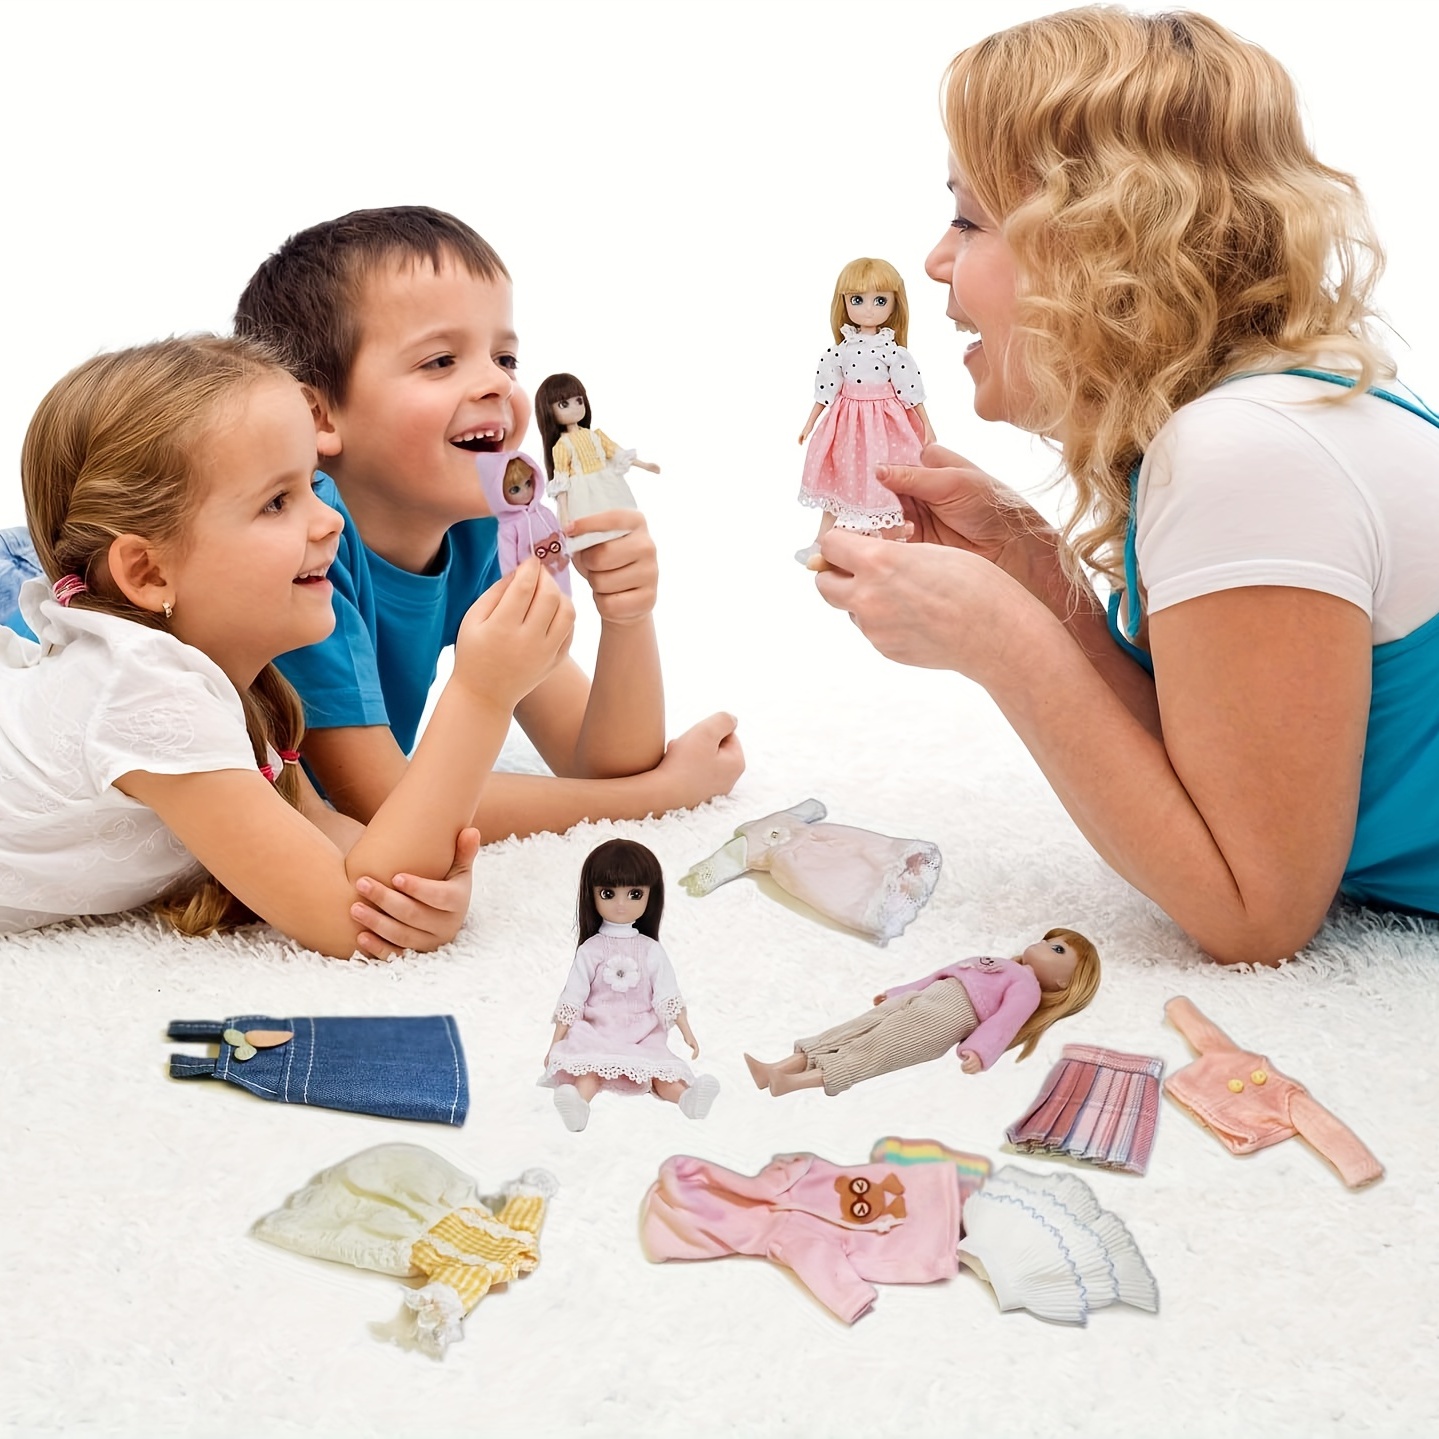 Lottie Dolls Toys Clothes & Playsets